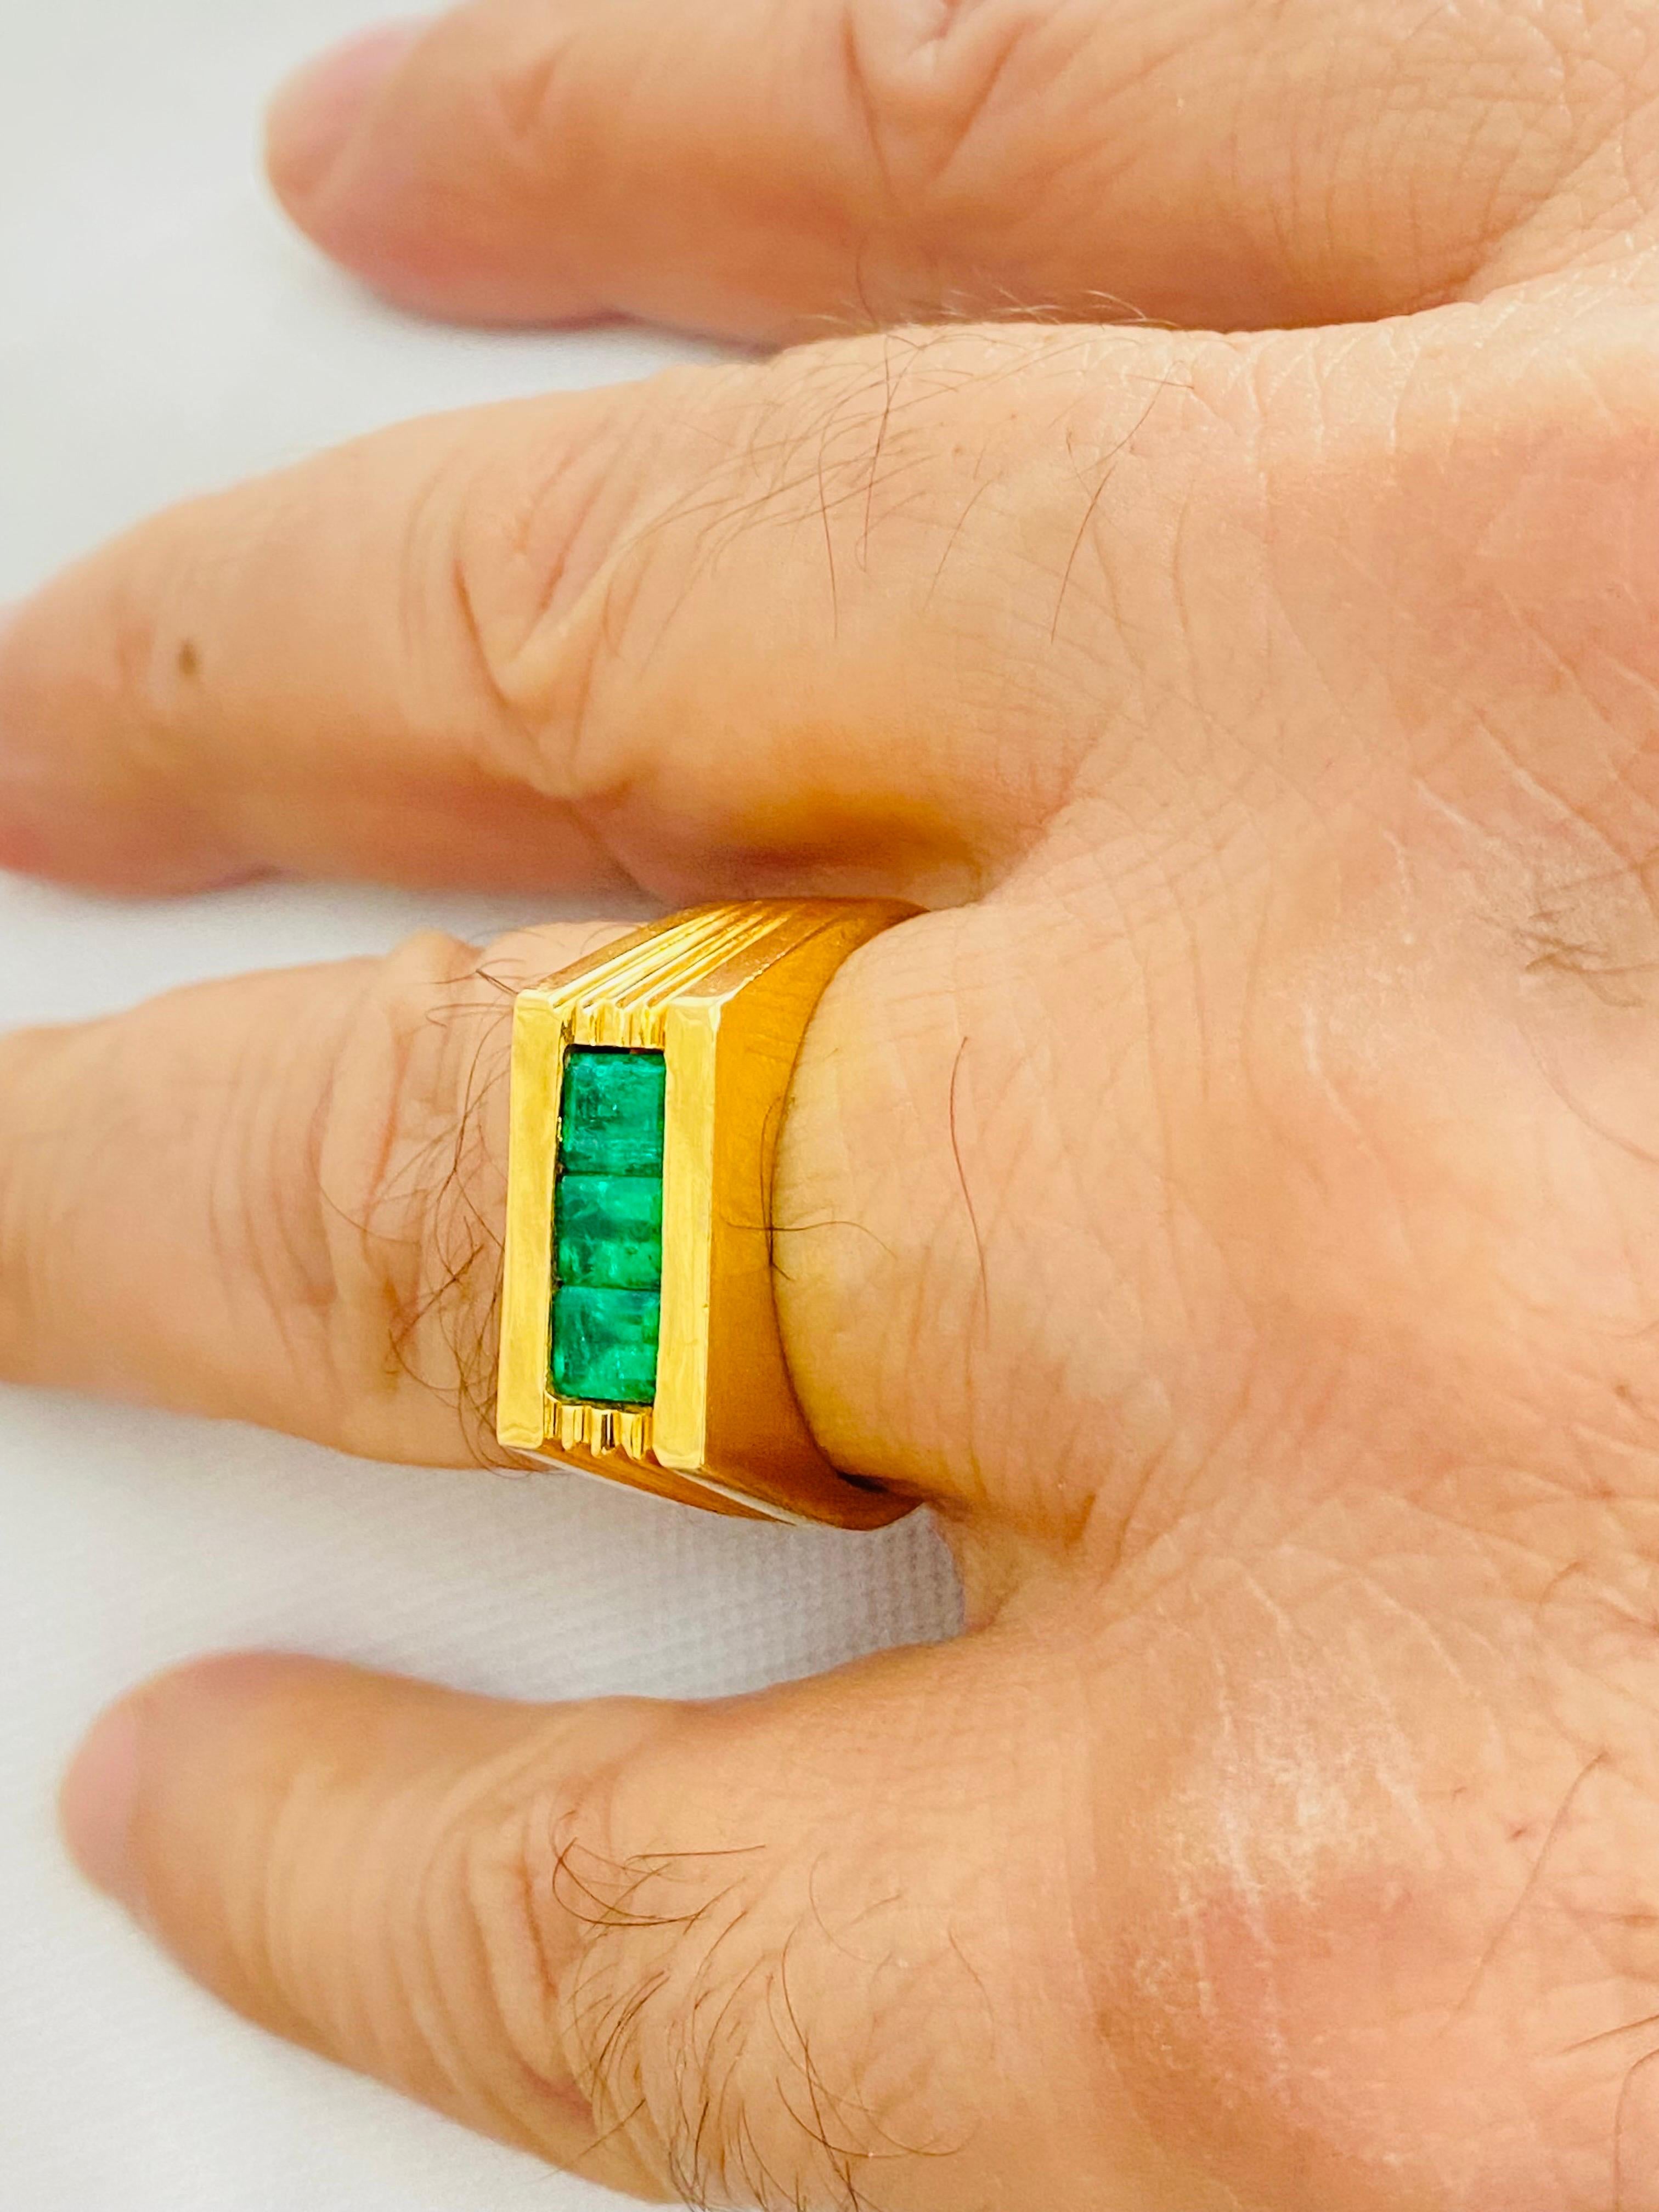 Vintage Men’s 1.50 Carat Colombian Emeralds Ring 18k Gold. The ring features 3 emerald stones weighting approx 0.50 ct each by measurement for a total of 1.50 carat weight. The emeralds are mesmerizing and have a very rich and luxury appearance. The